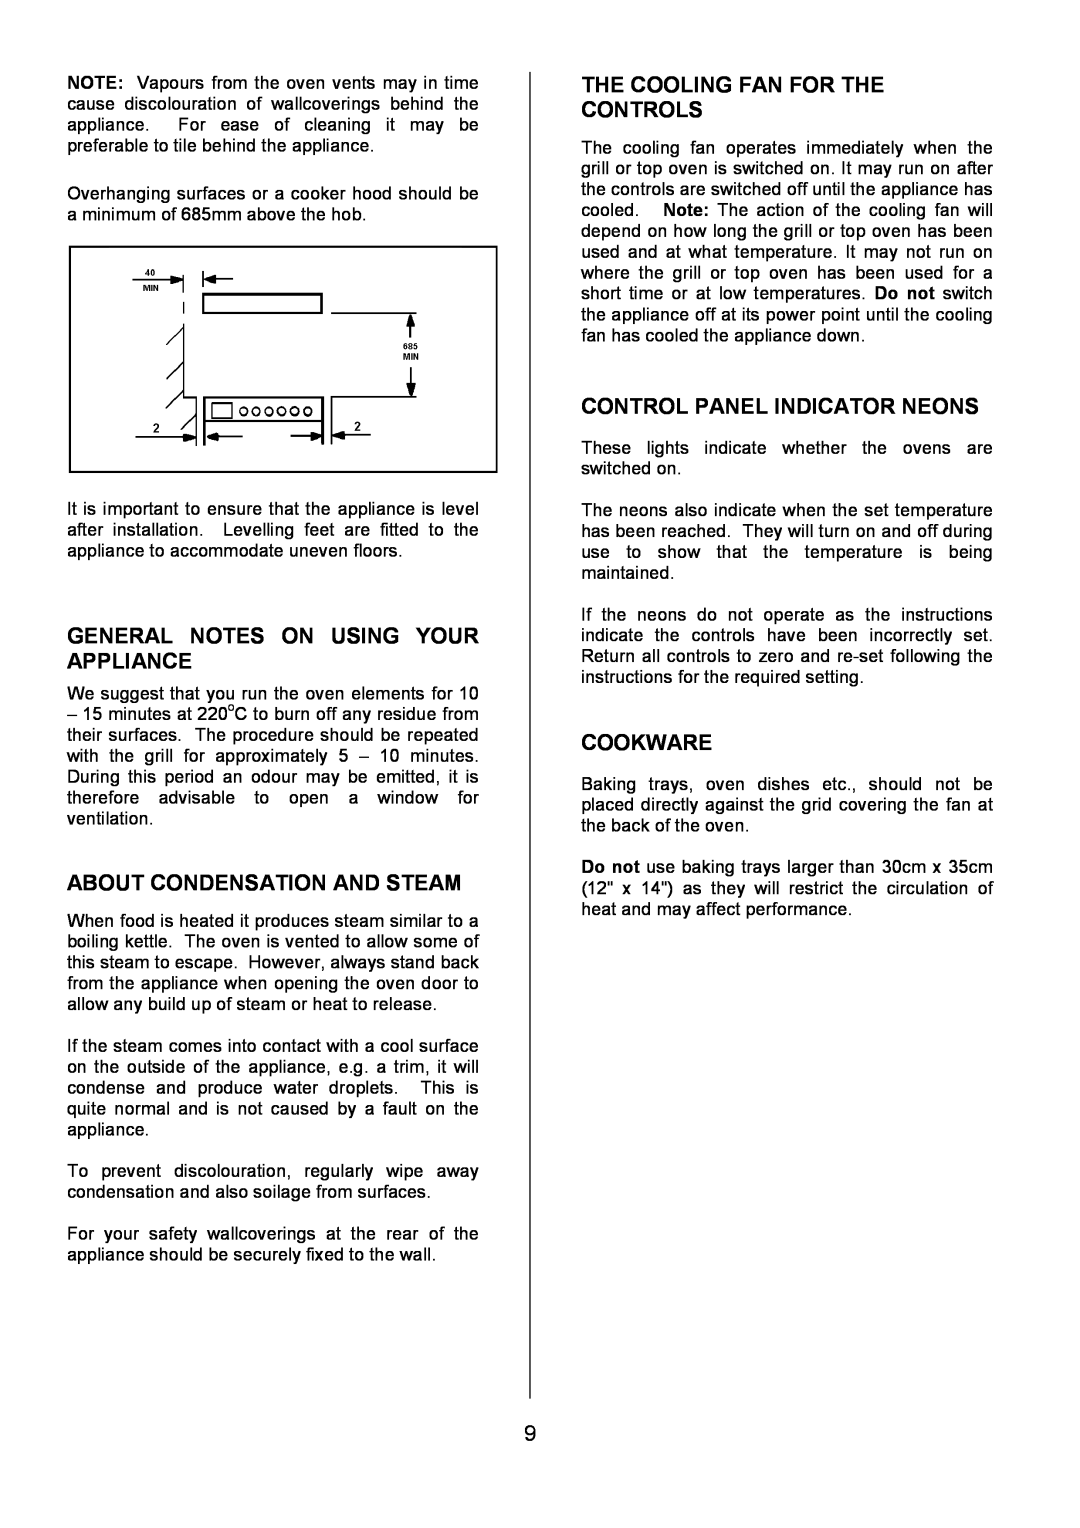 Tricity Bendix SIE514 General Notes On Using Your Appliance, About Condensation And Steam, Control Panel Indicator Neons 